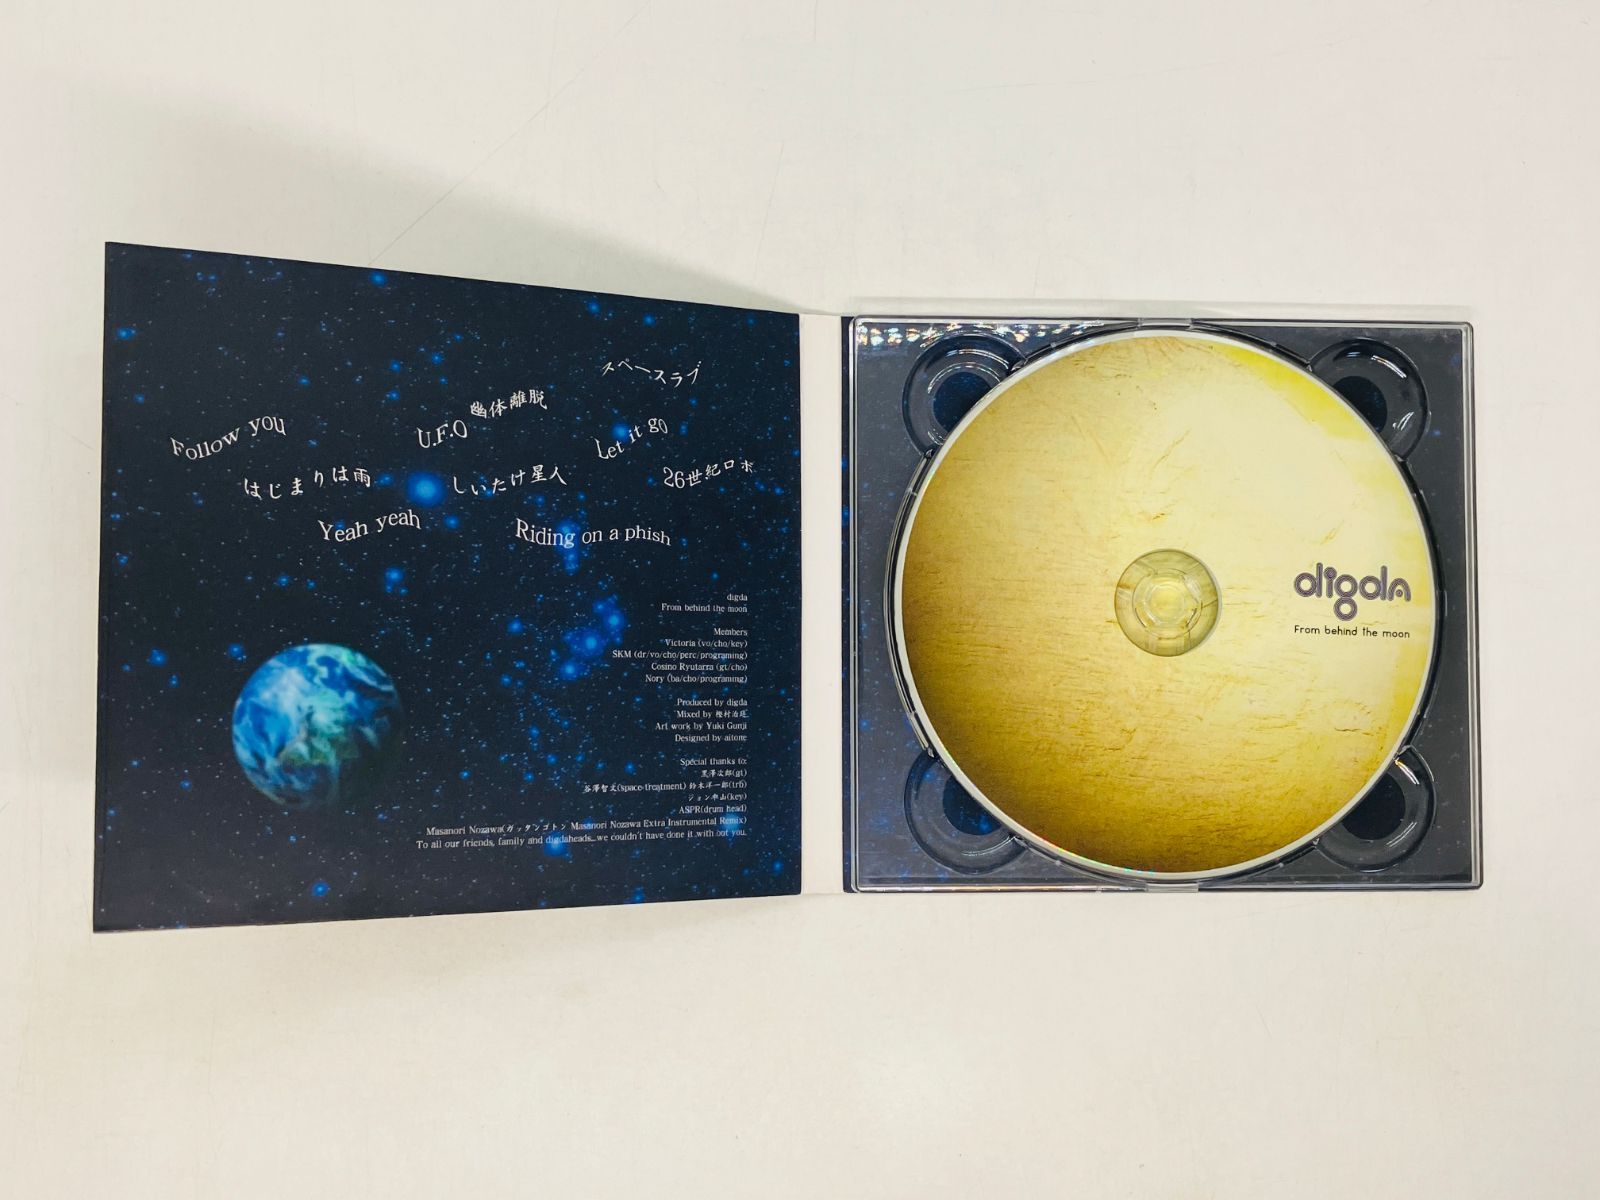 CD digda From behind the moon / スペースラブ , 26世紀ロボ